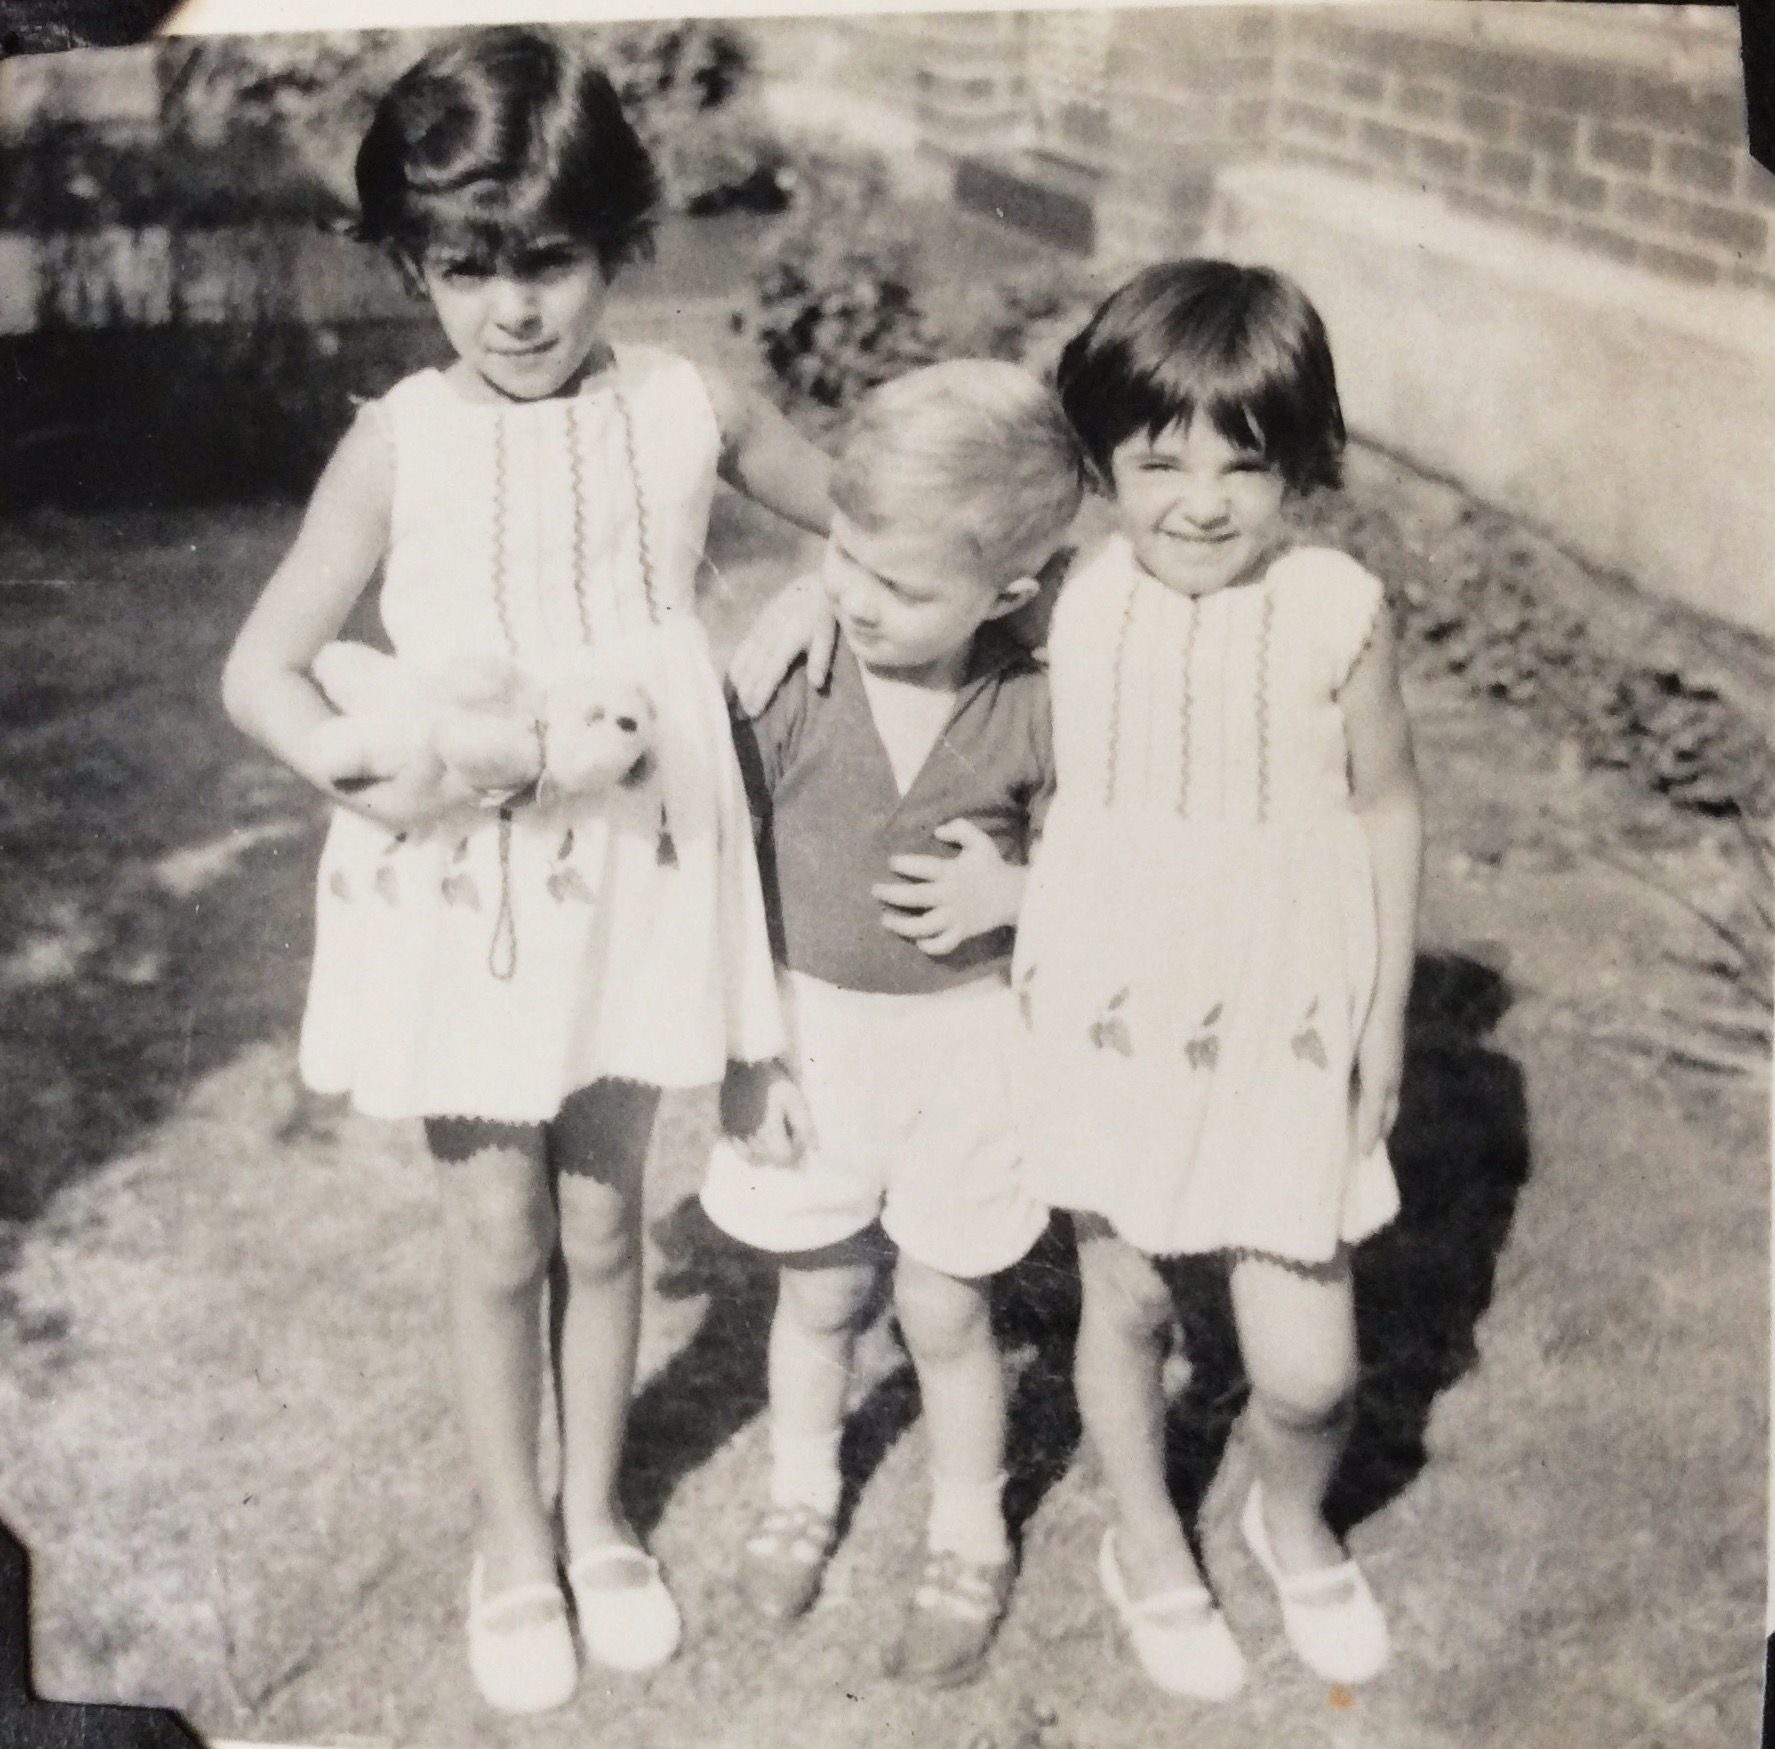 Michael and the Capes girls, Linda and ???? March 1960